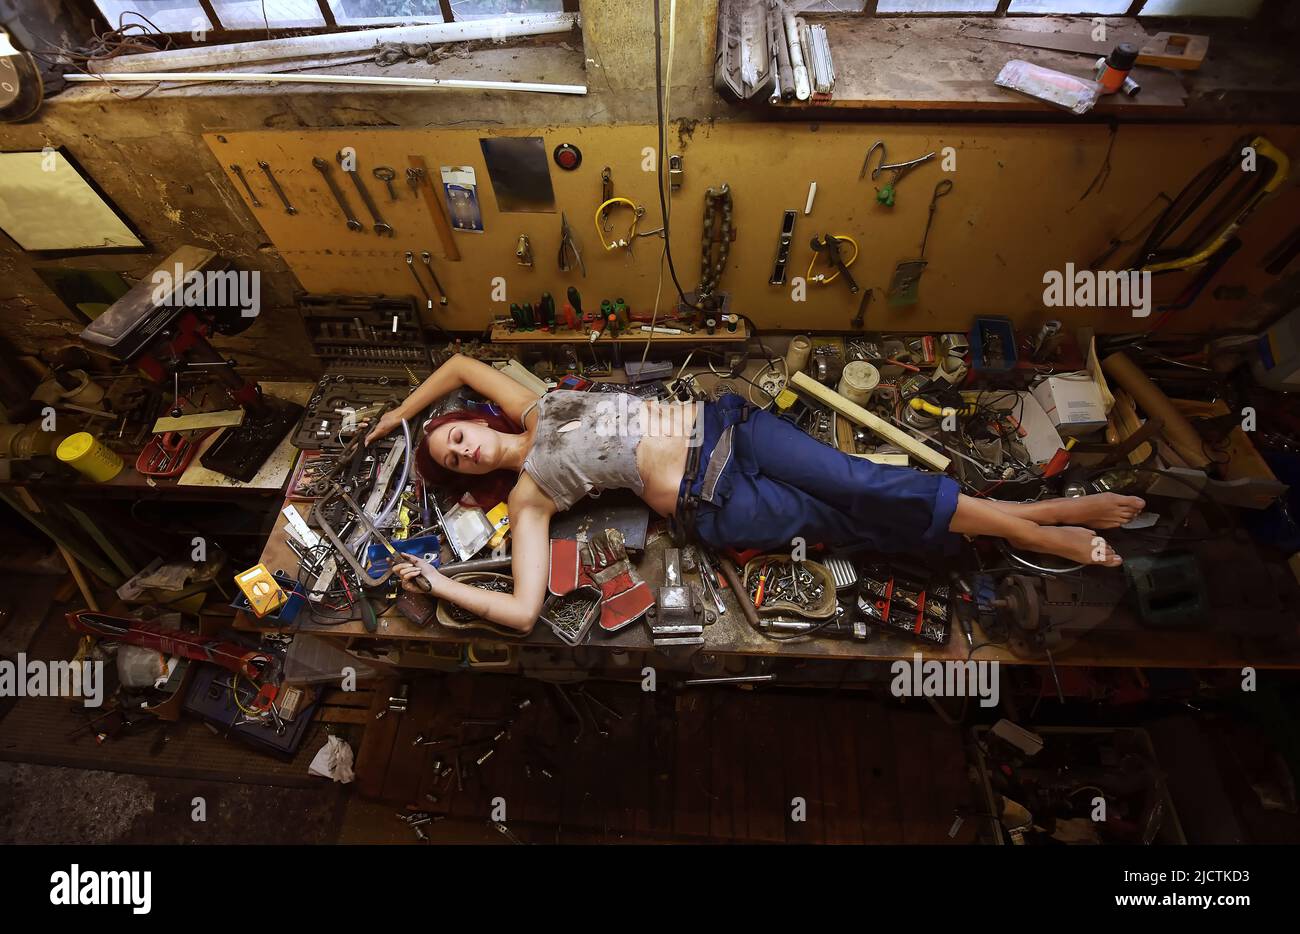 A young beautiful woman finds time to sleep during  her working hours. She lies down on the work bench filled with tools and other electronic devices. Stock Photo